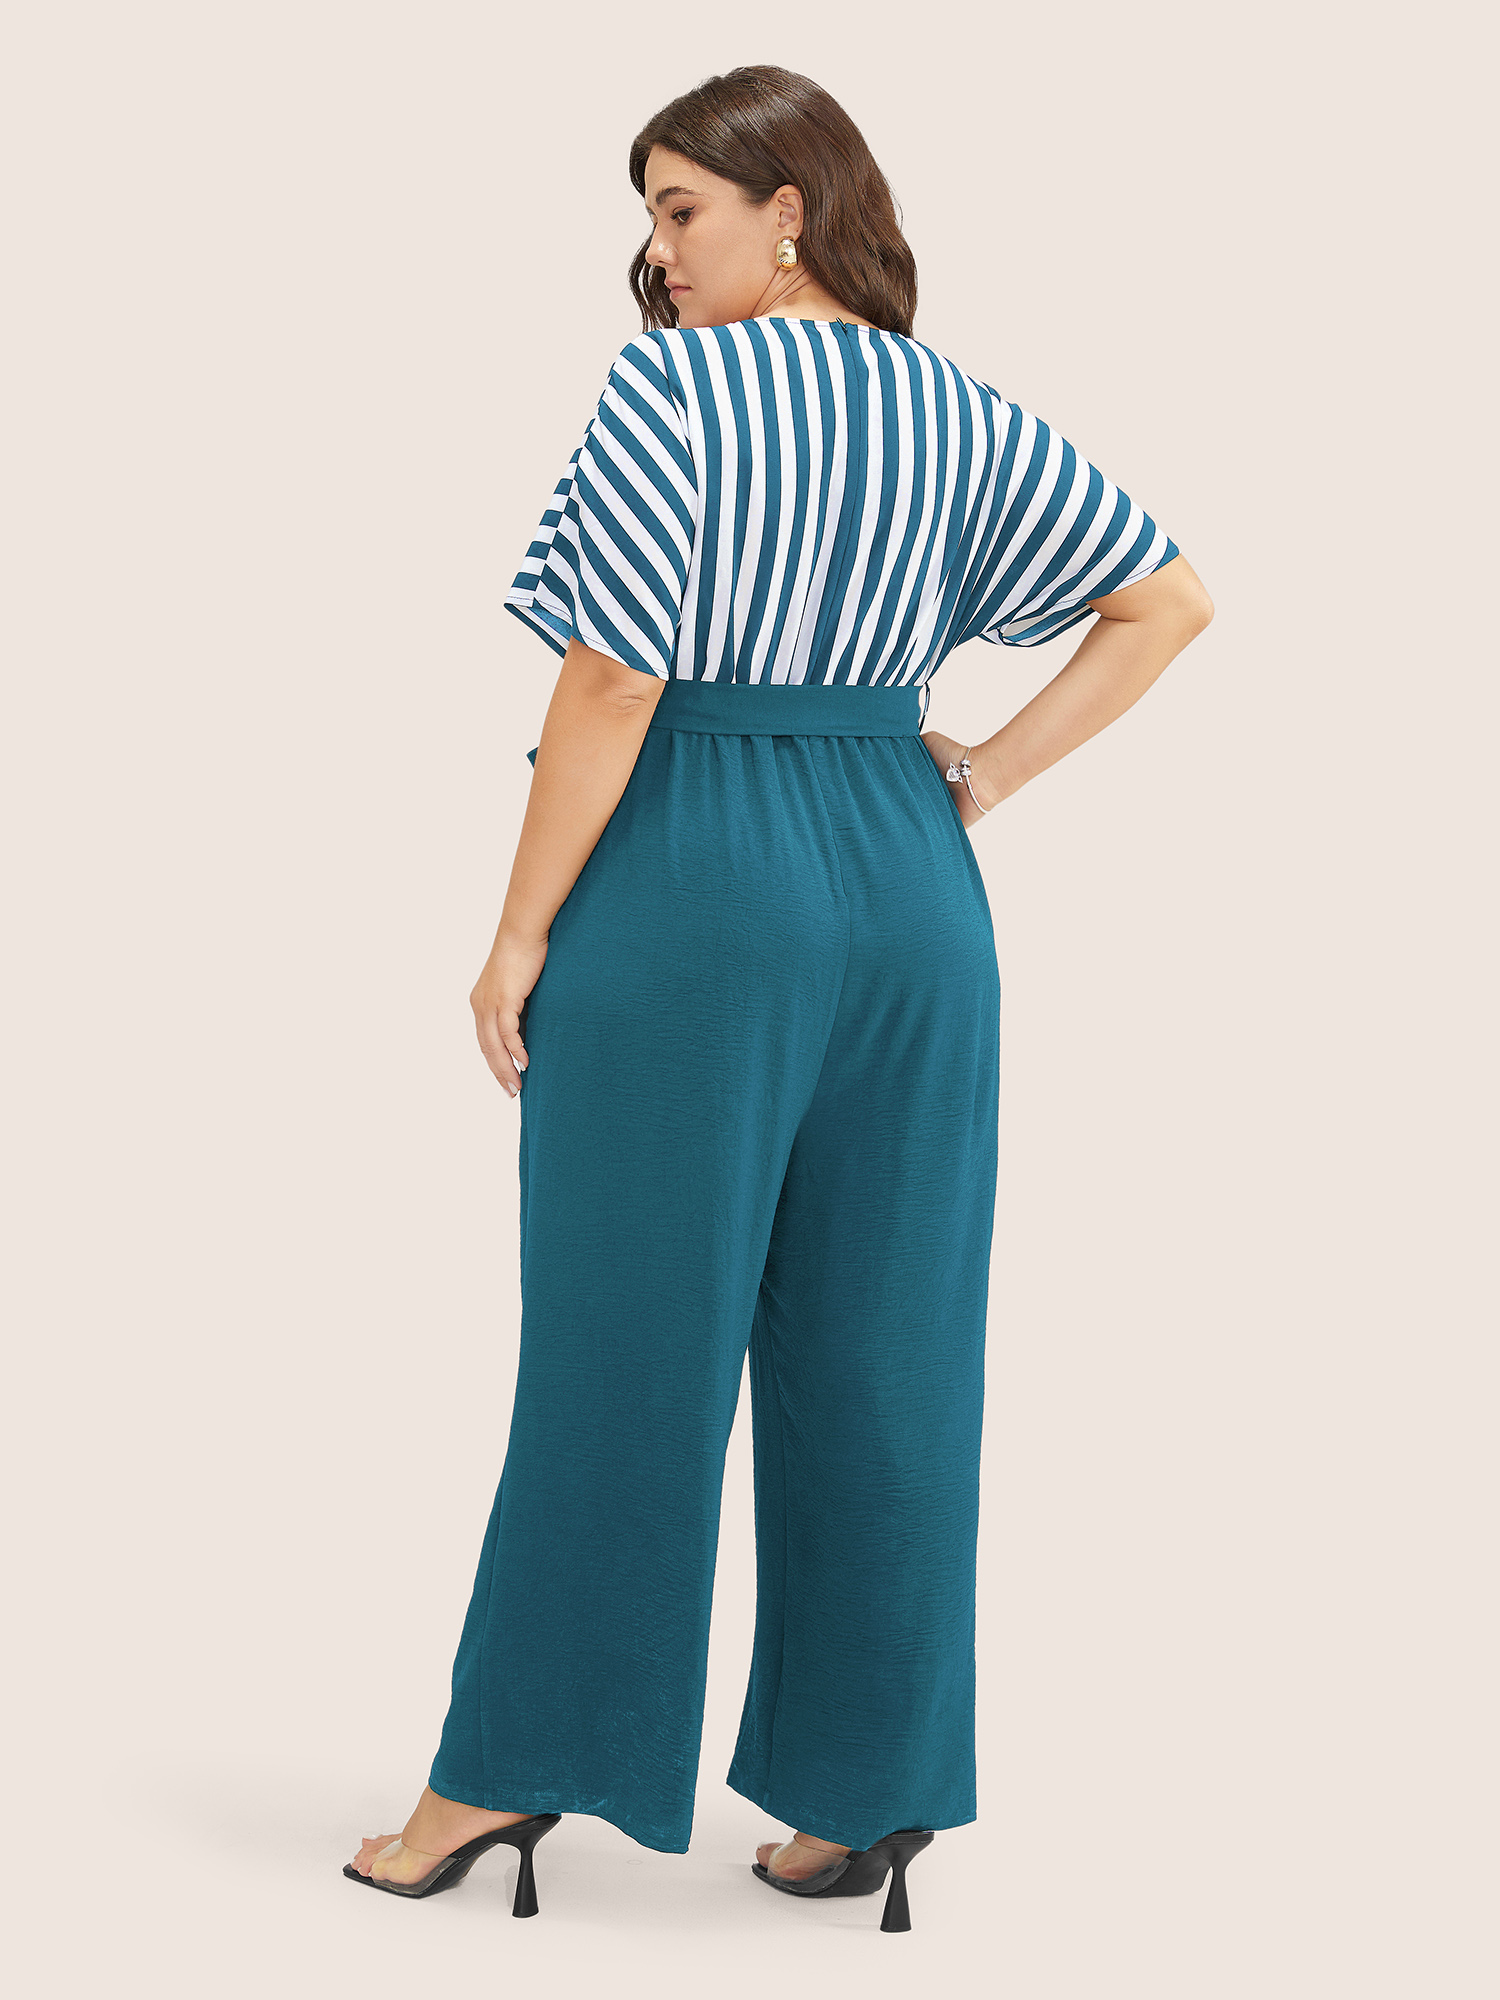 

Plus Size Mediumblue Striped Patchwork Pocket Batwing Sleeve Belted Wrap Jumpsuit Women At the Office Short sleeve Overlap Collar Work Loose Jumpsuits BloomChic